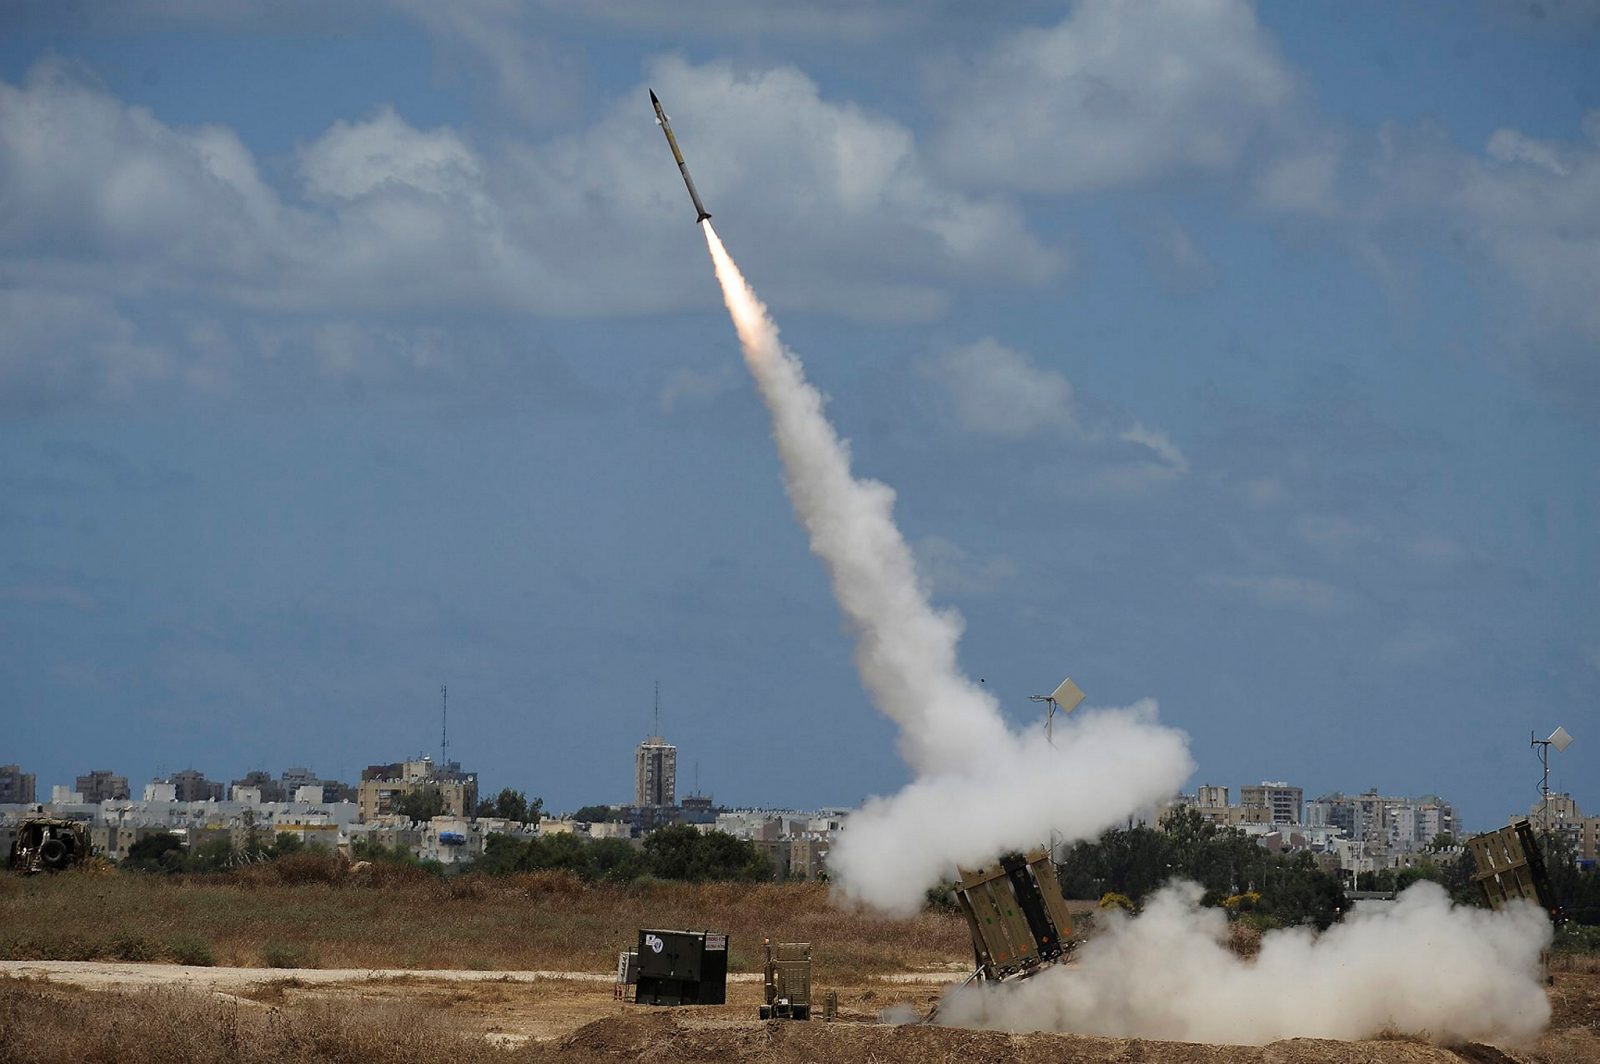 An Iron Dome Missile Defense battery set up near Ashdod fires an intercepting missile on July 14, 2014. Photo by David Buimovitch/FLASH90